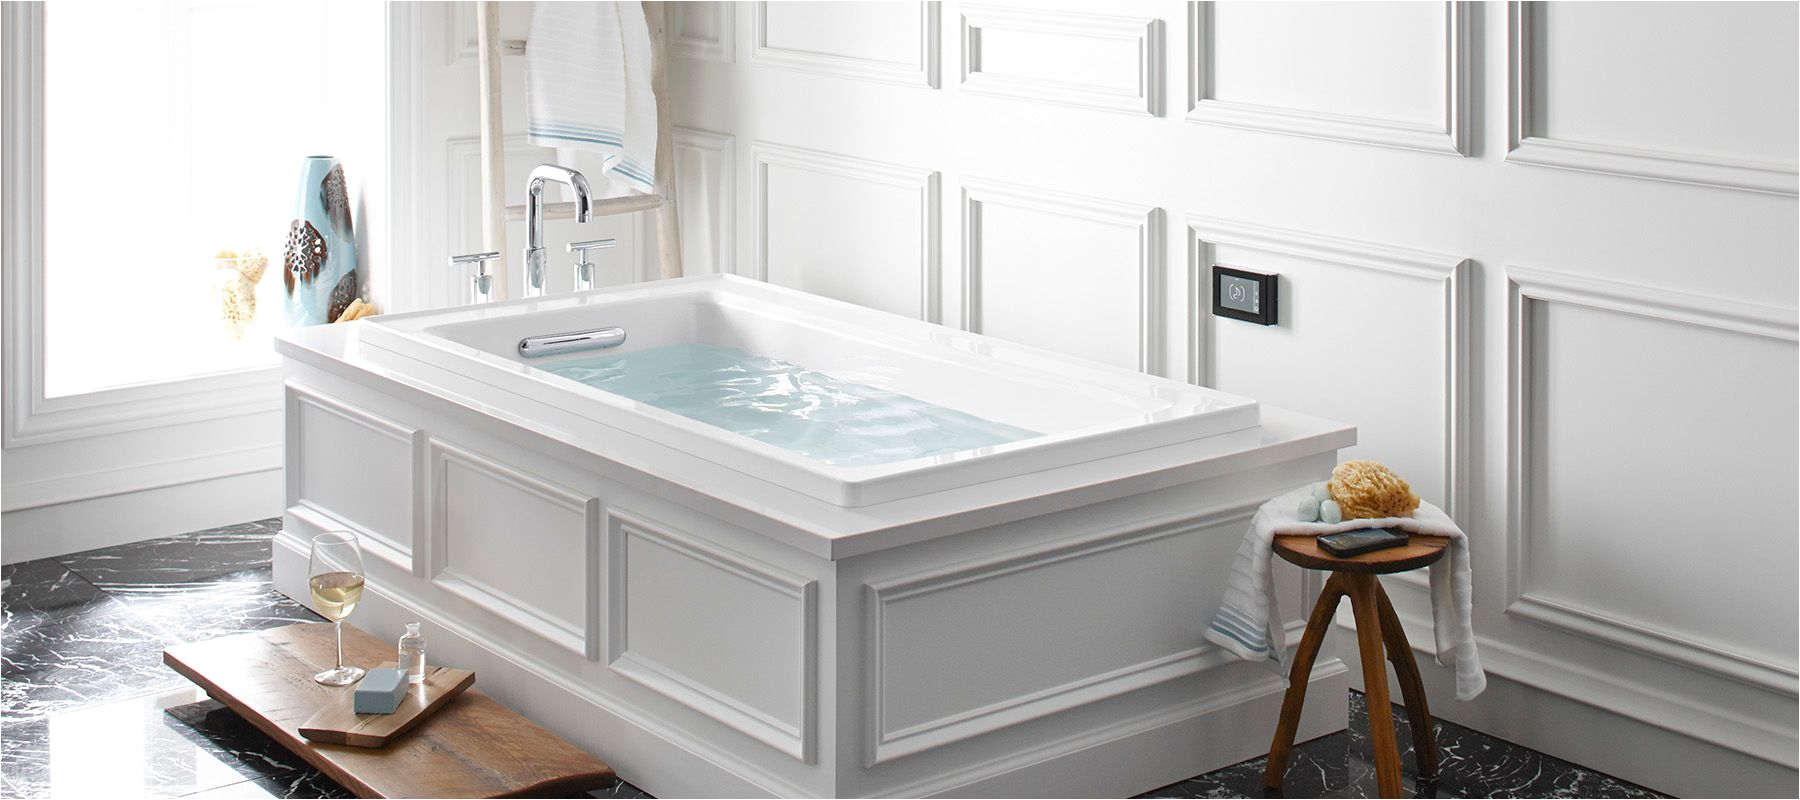 treat yourself and soak in standalone tub